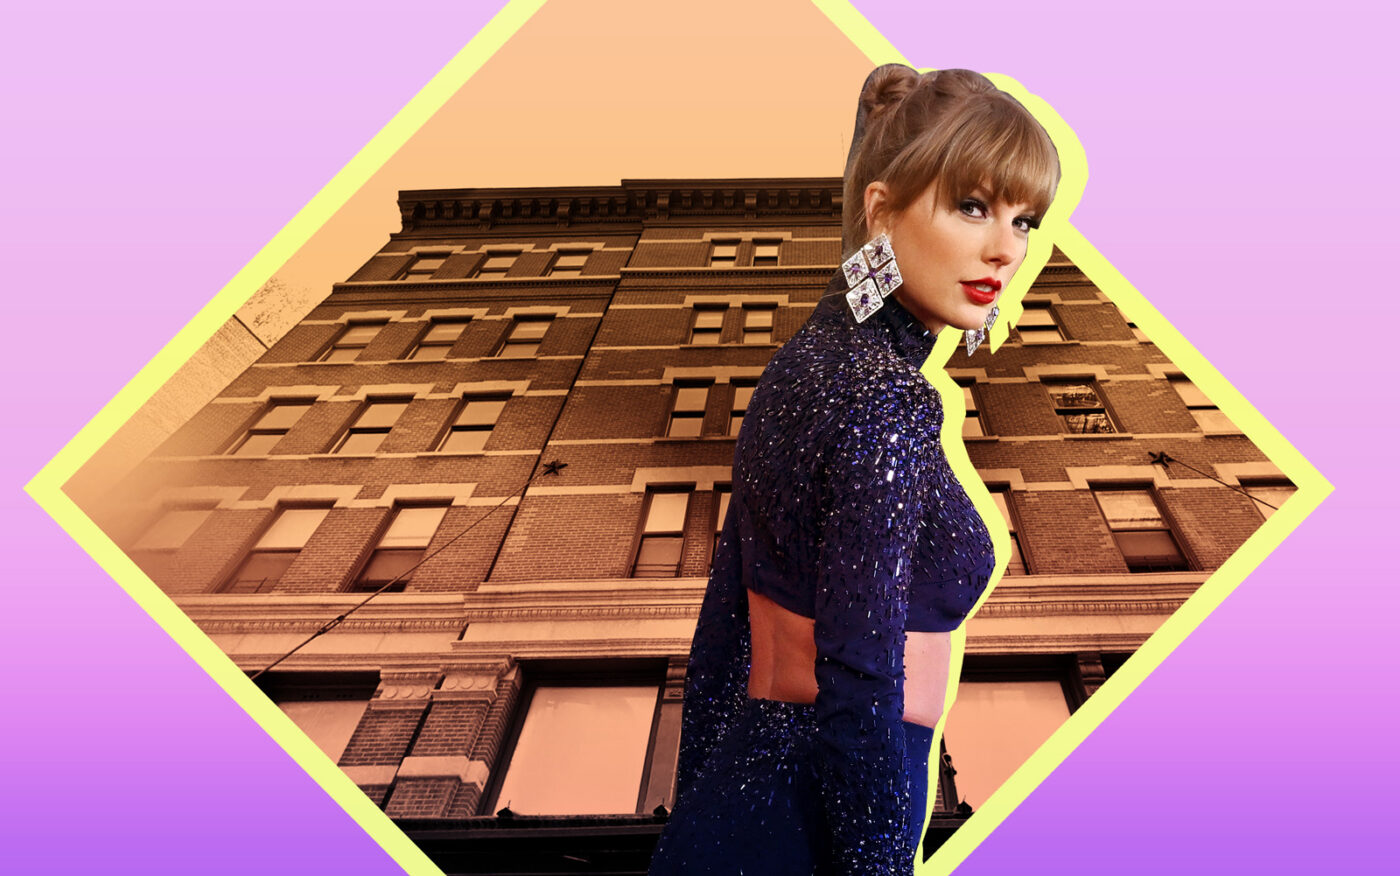 Taylor Swift and the Sugar Loaf building in Tribeca